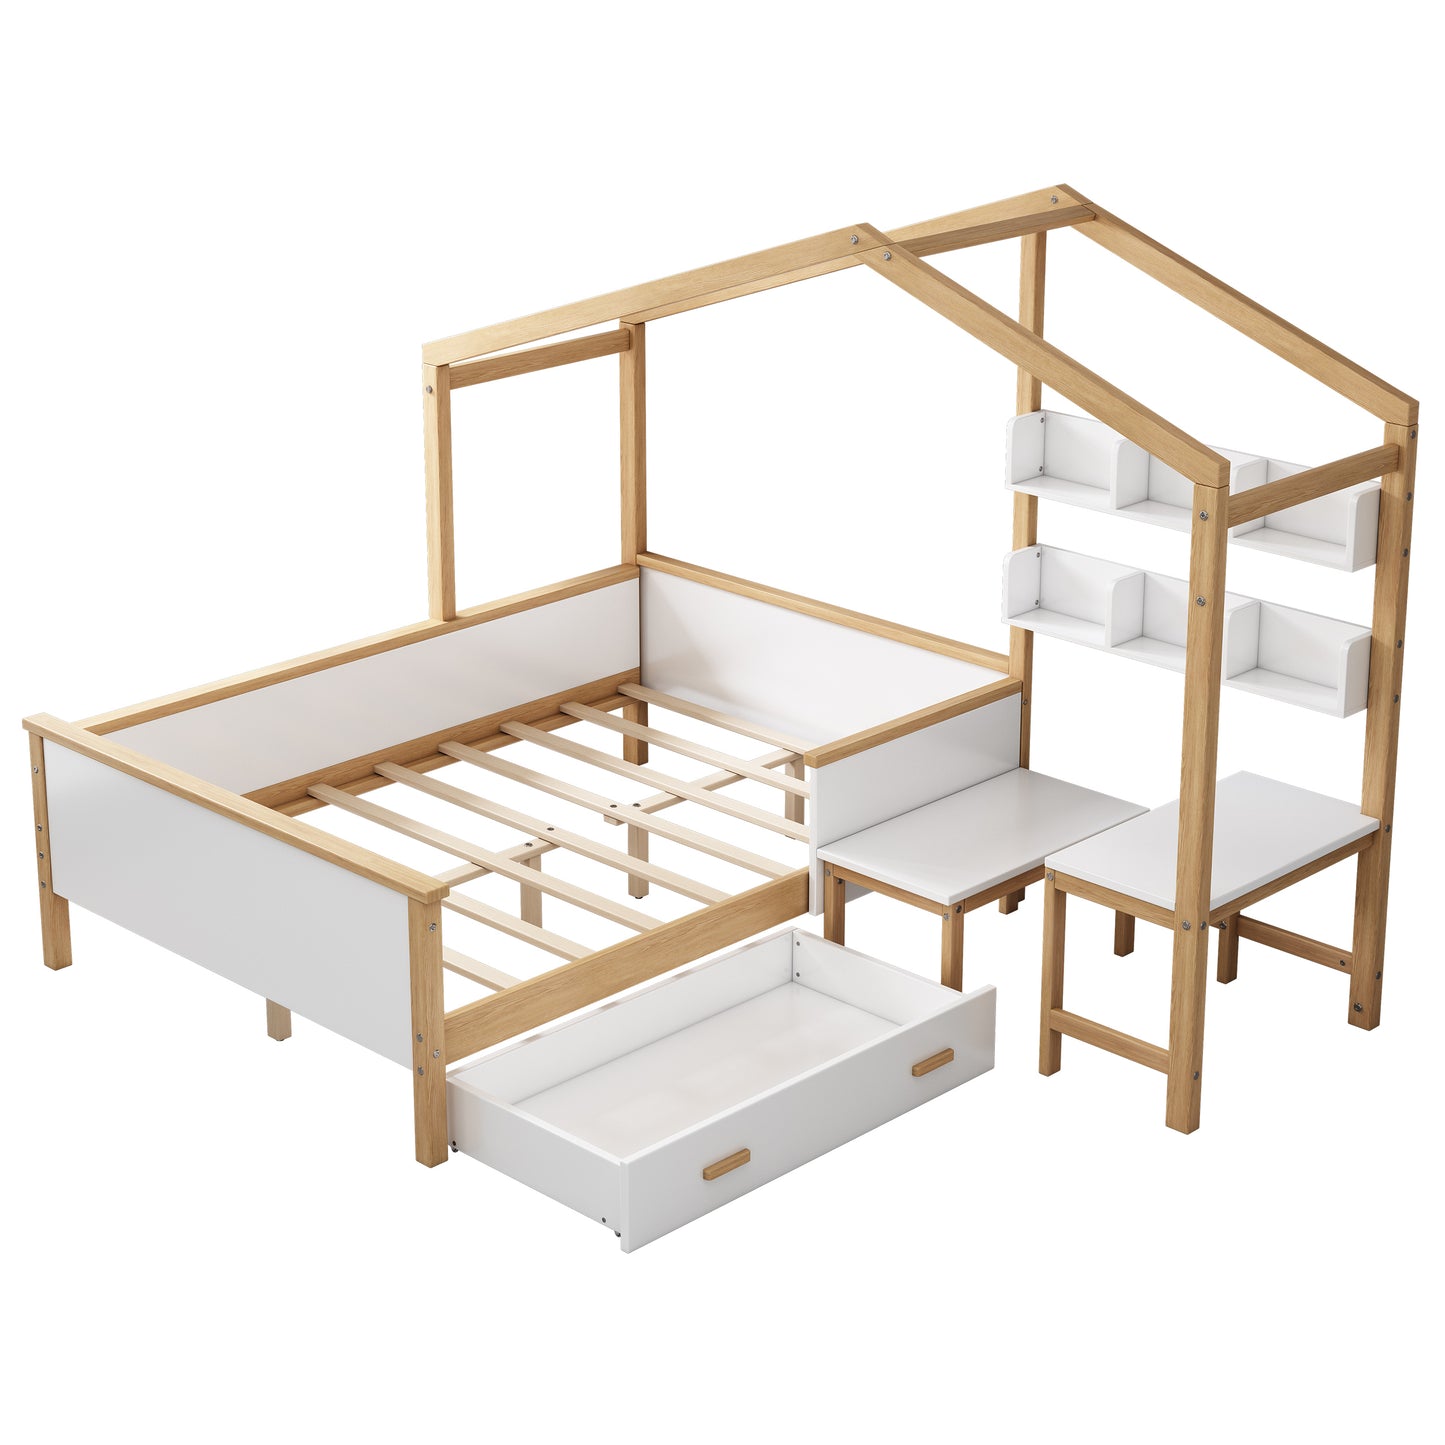 Full Size Wooden House Bed White and Original Wood Colored Frame with Drawer, Desk and Bookshelf for Children or Guest Room